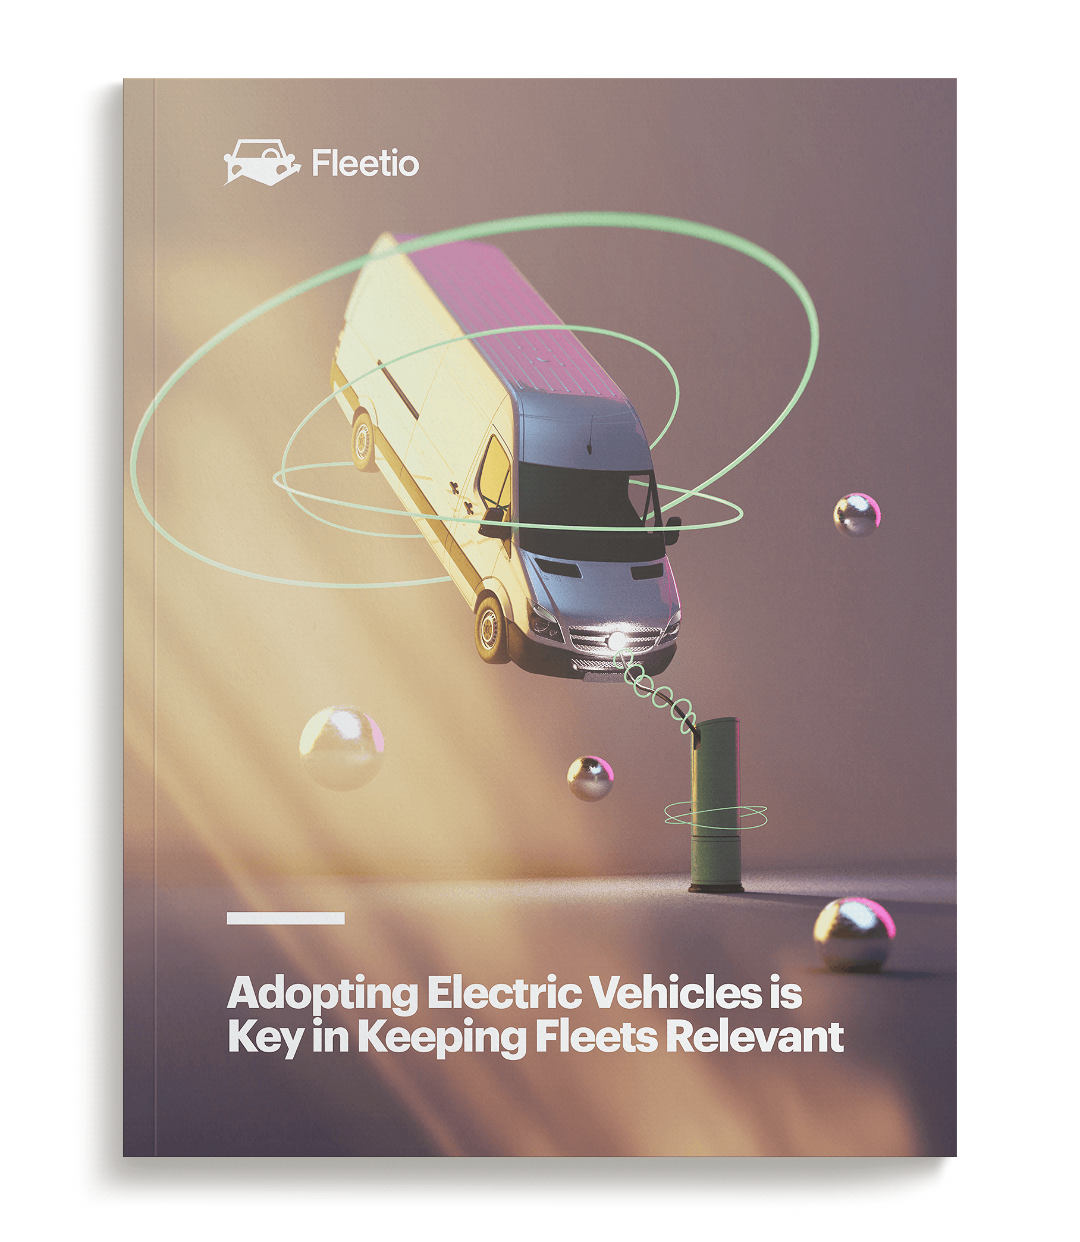 Adopting Electric Vehicles is Key in Keeping Fleets Relevant